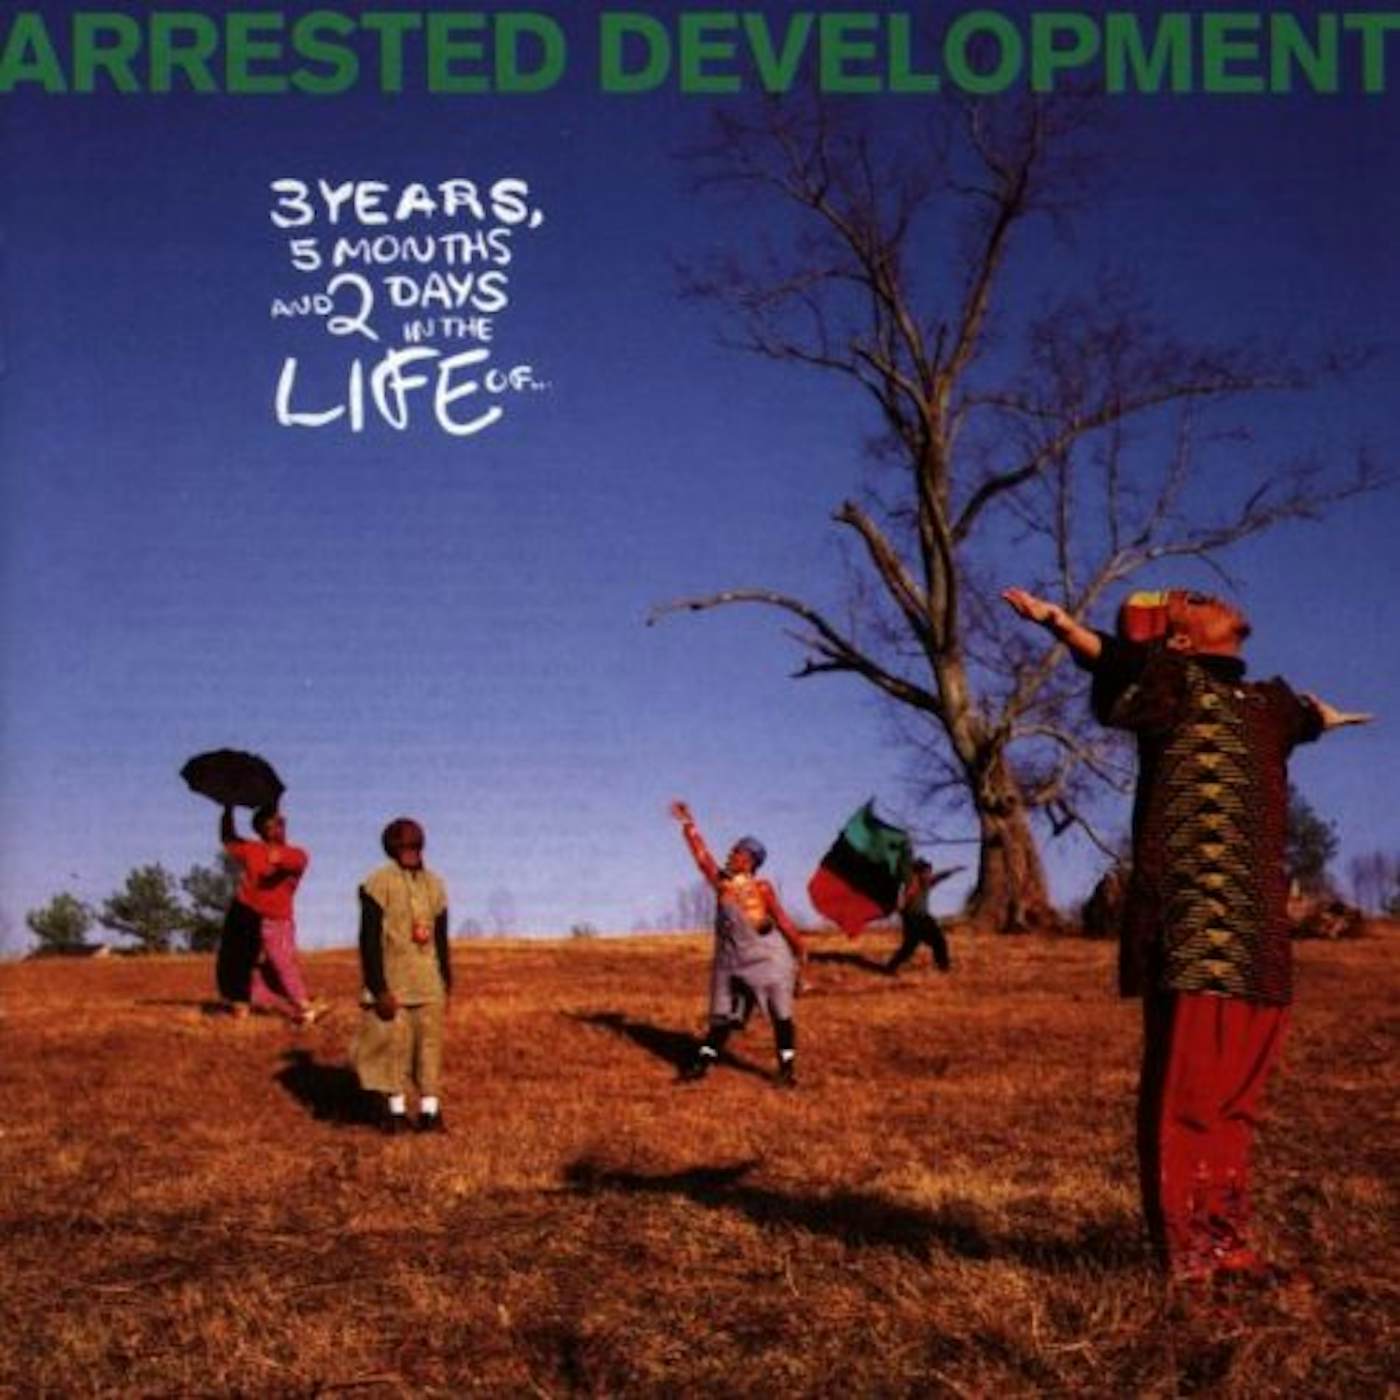 Arrested Development 3 YEARS 5 MONTHS & 2 DAYS IN THE LIFE CD